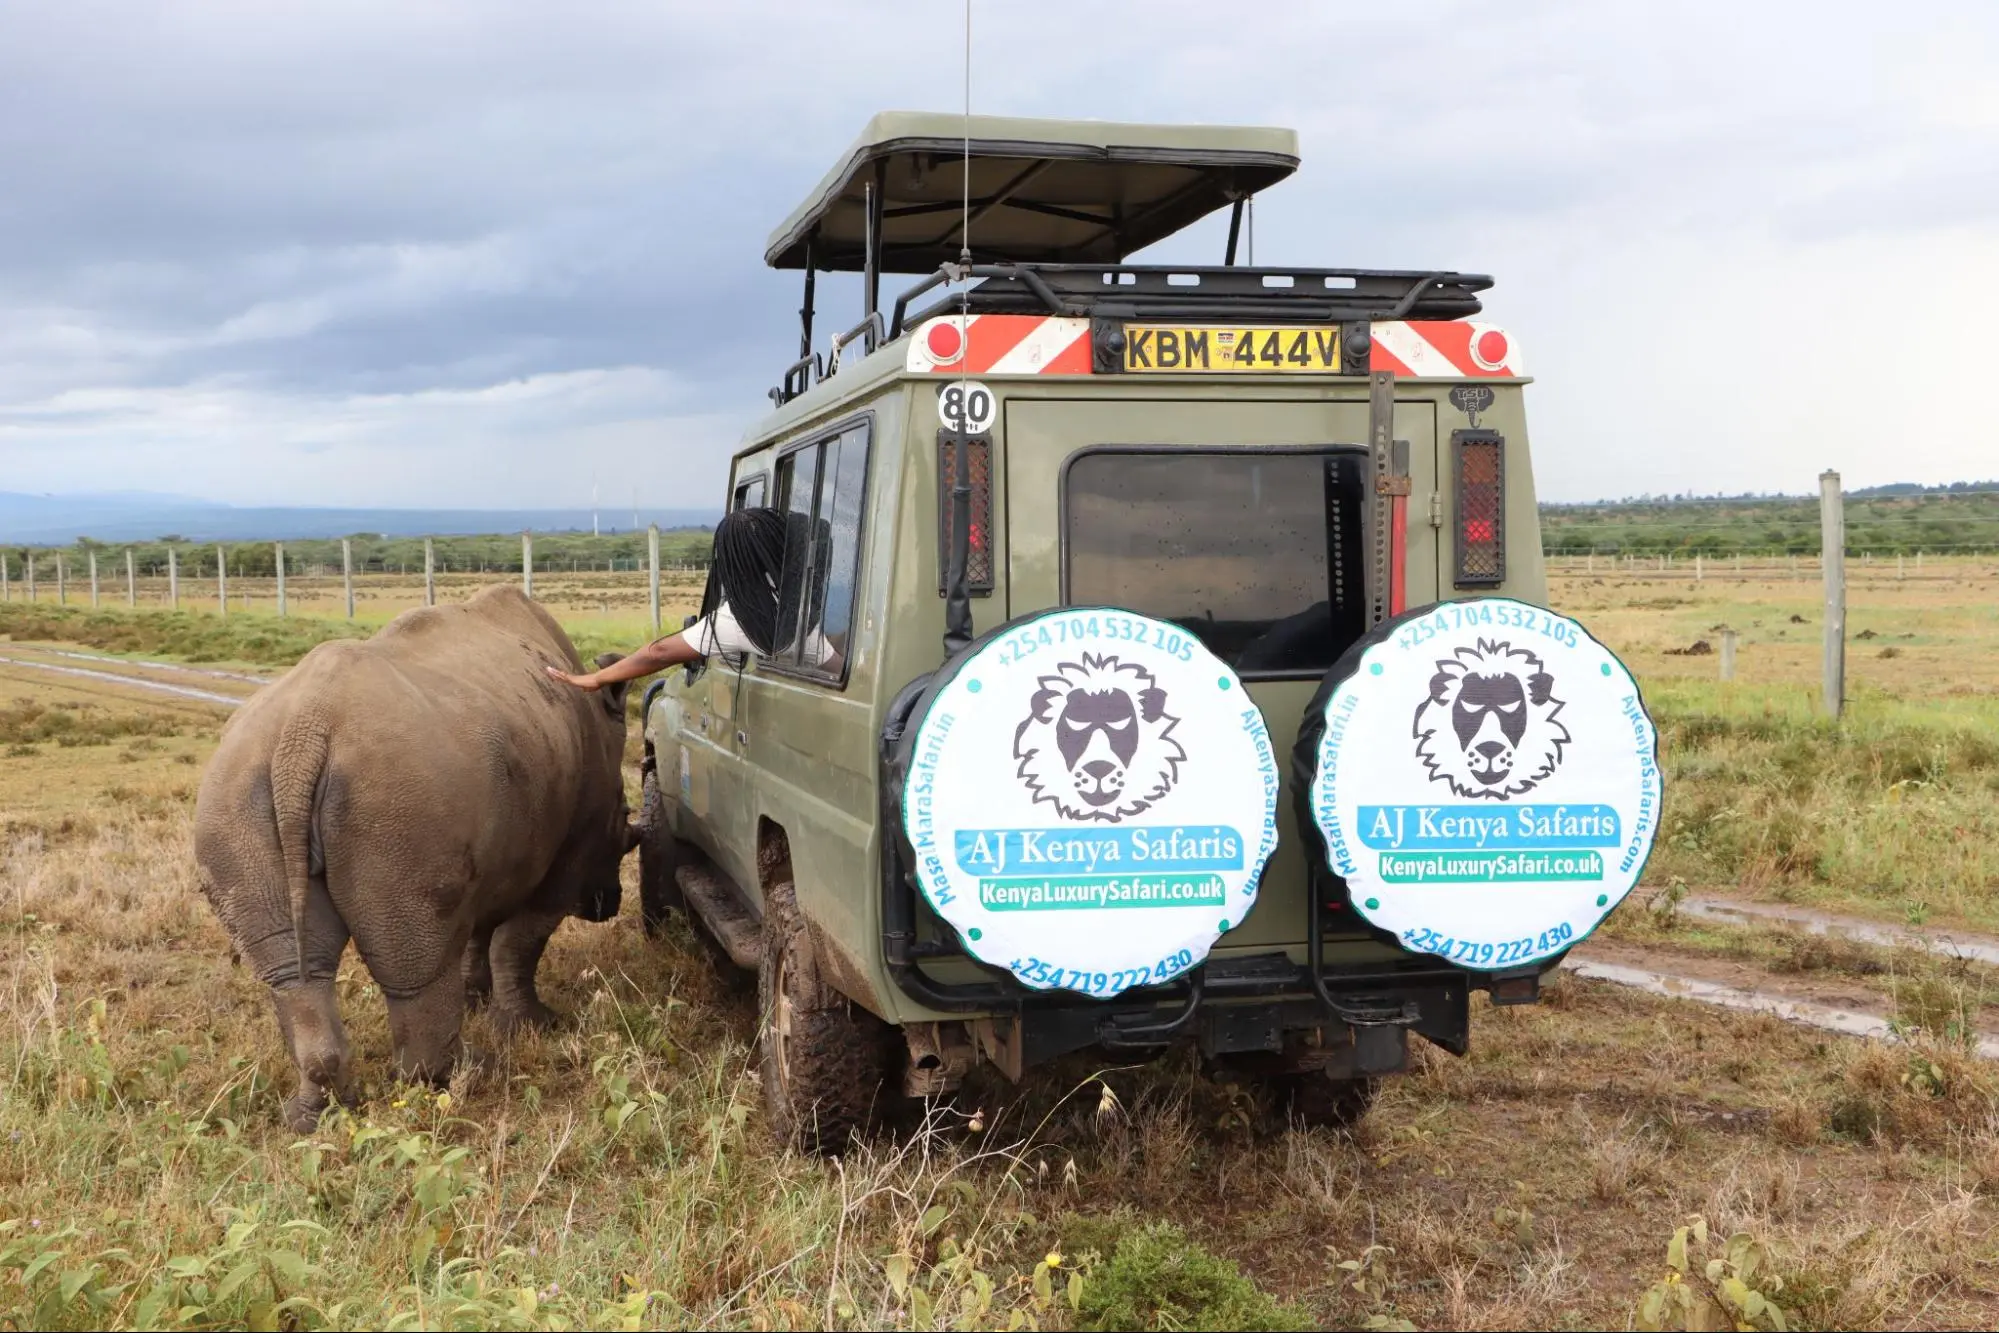 Holidays to Kenya safari - our guests on a trip to Ol Pejeta Conservancy